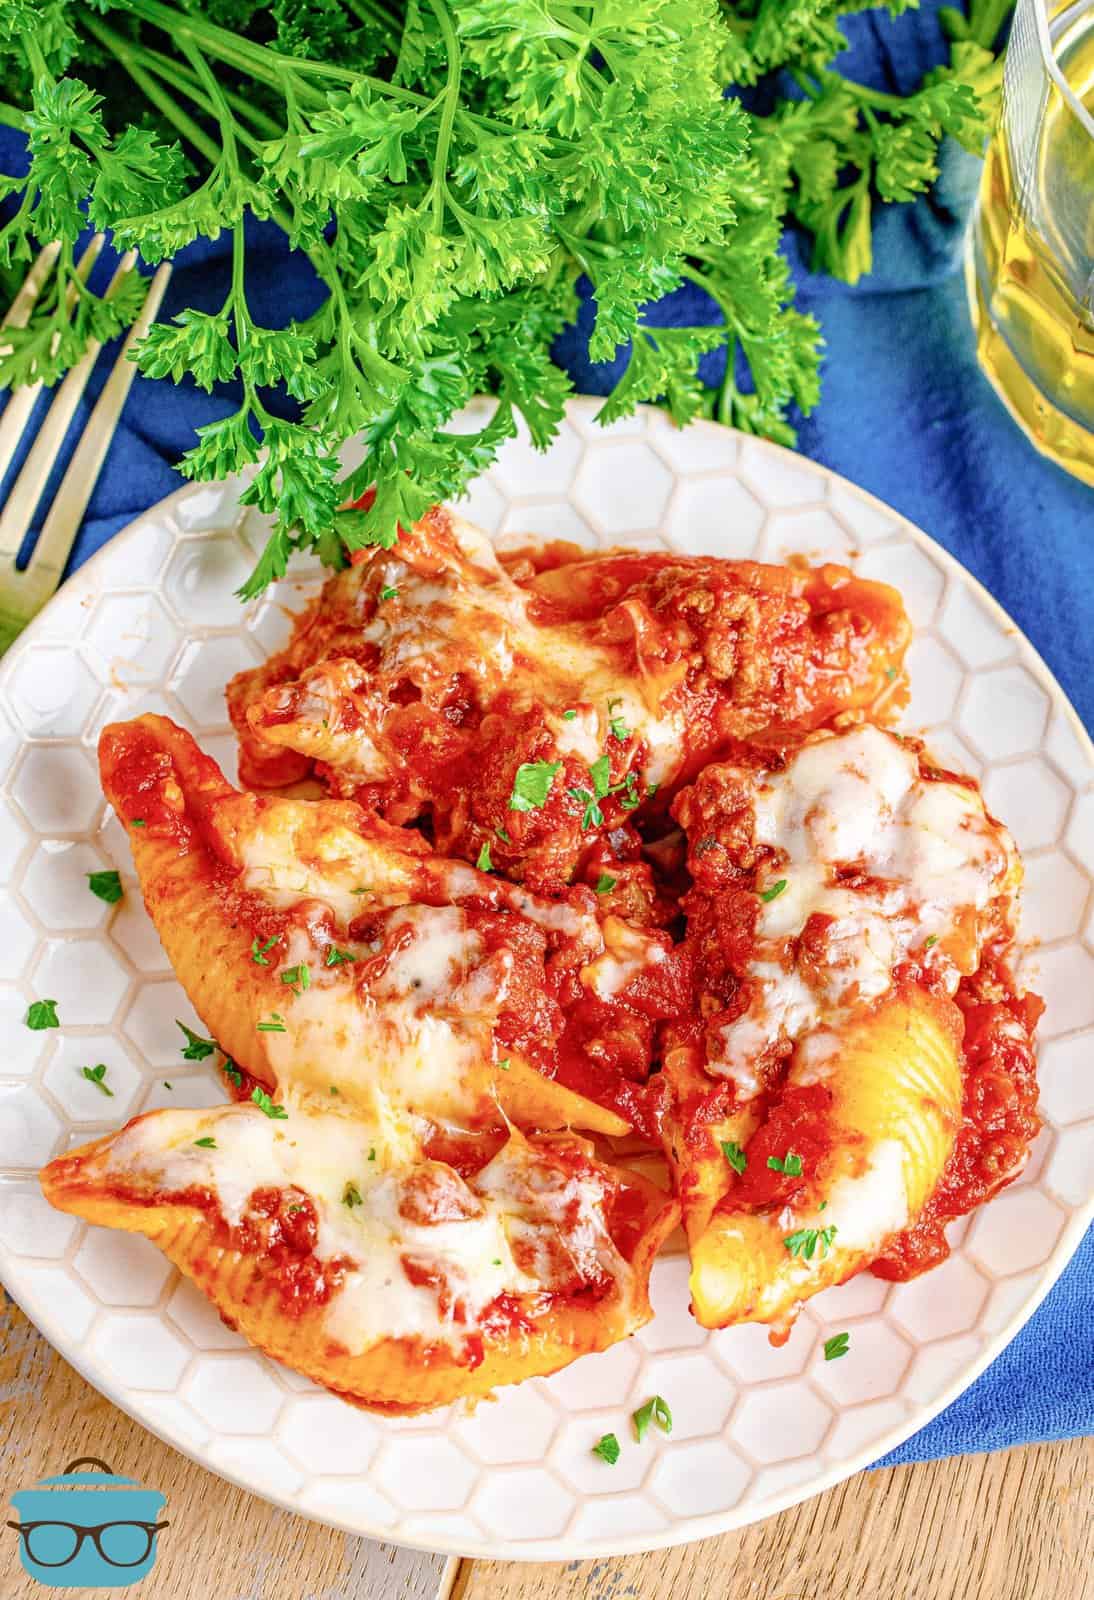 stuffed shells shown on a white plate with some fresh parsley in the background.